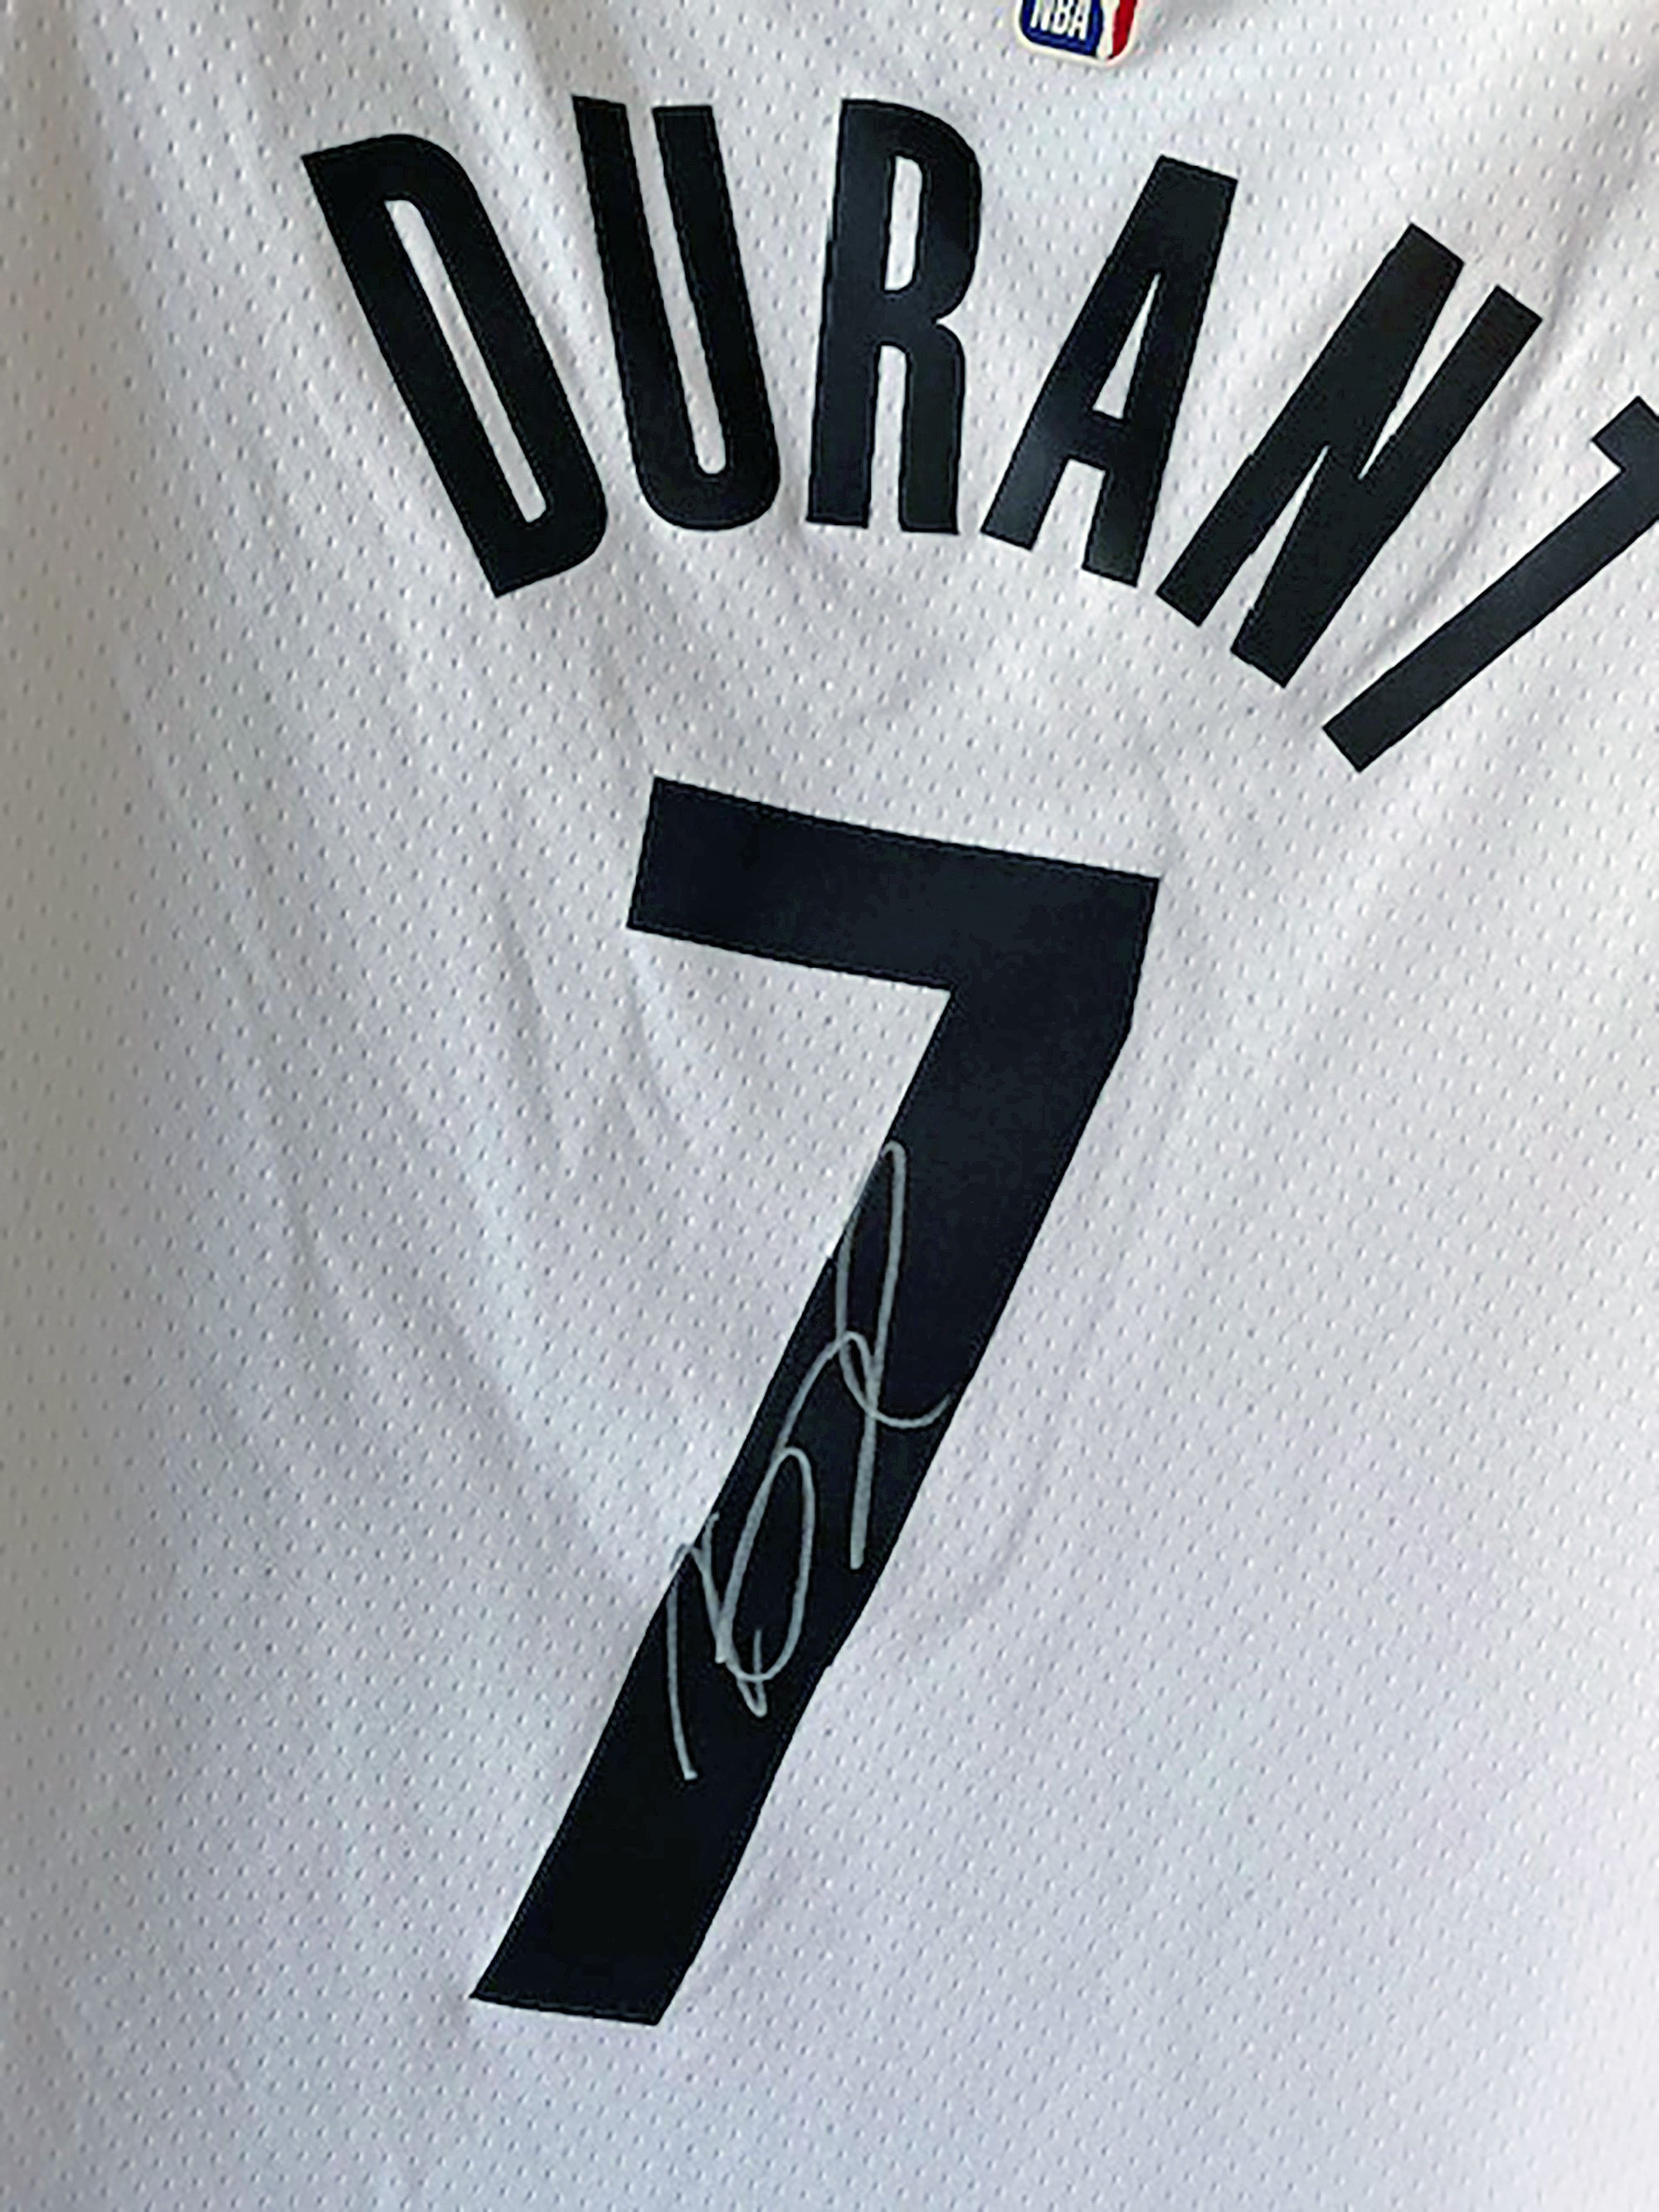 Kevin Durant Brooklyn Nets signed jersey with proof